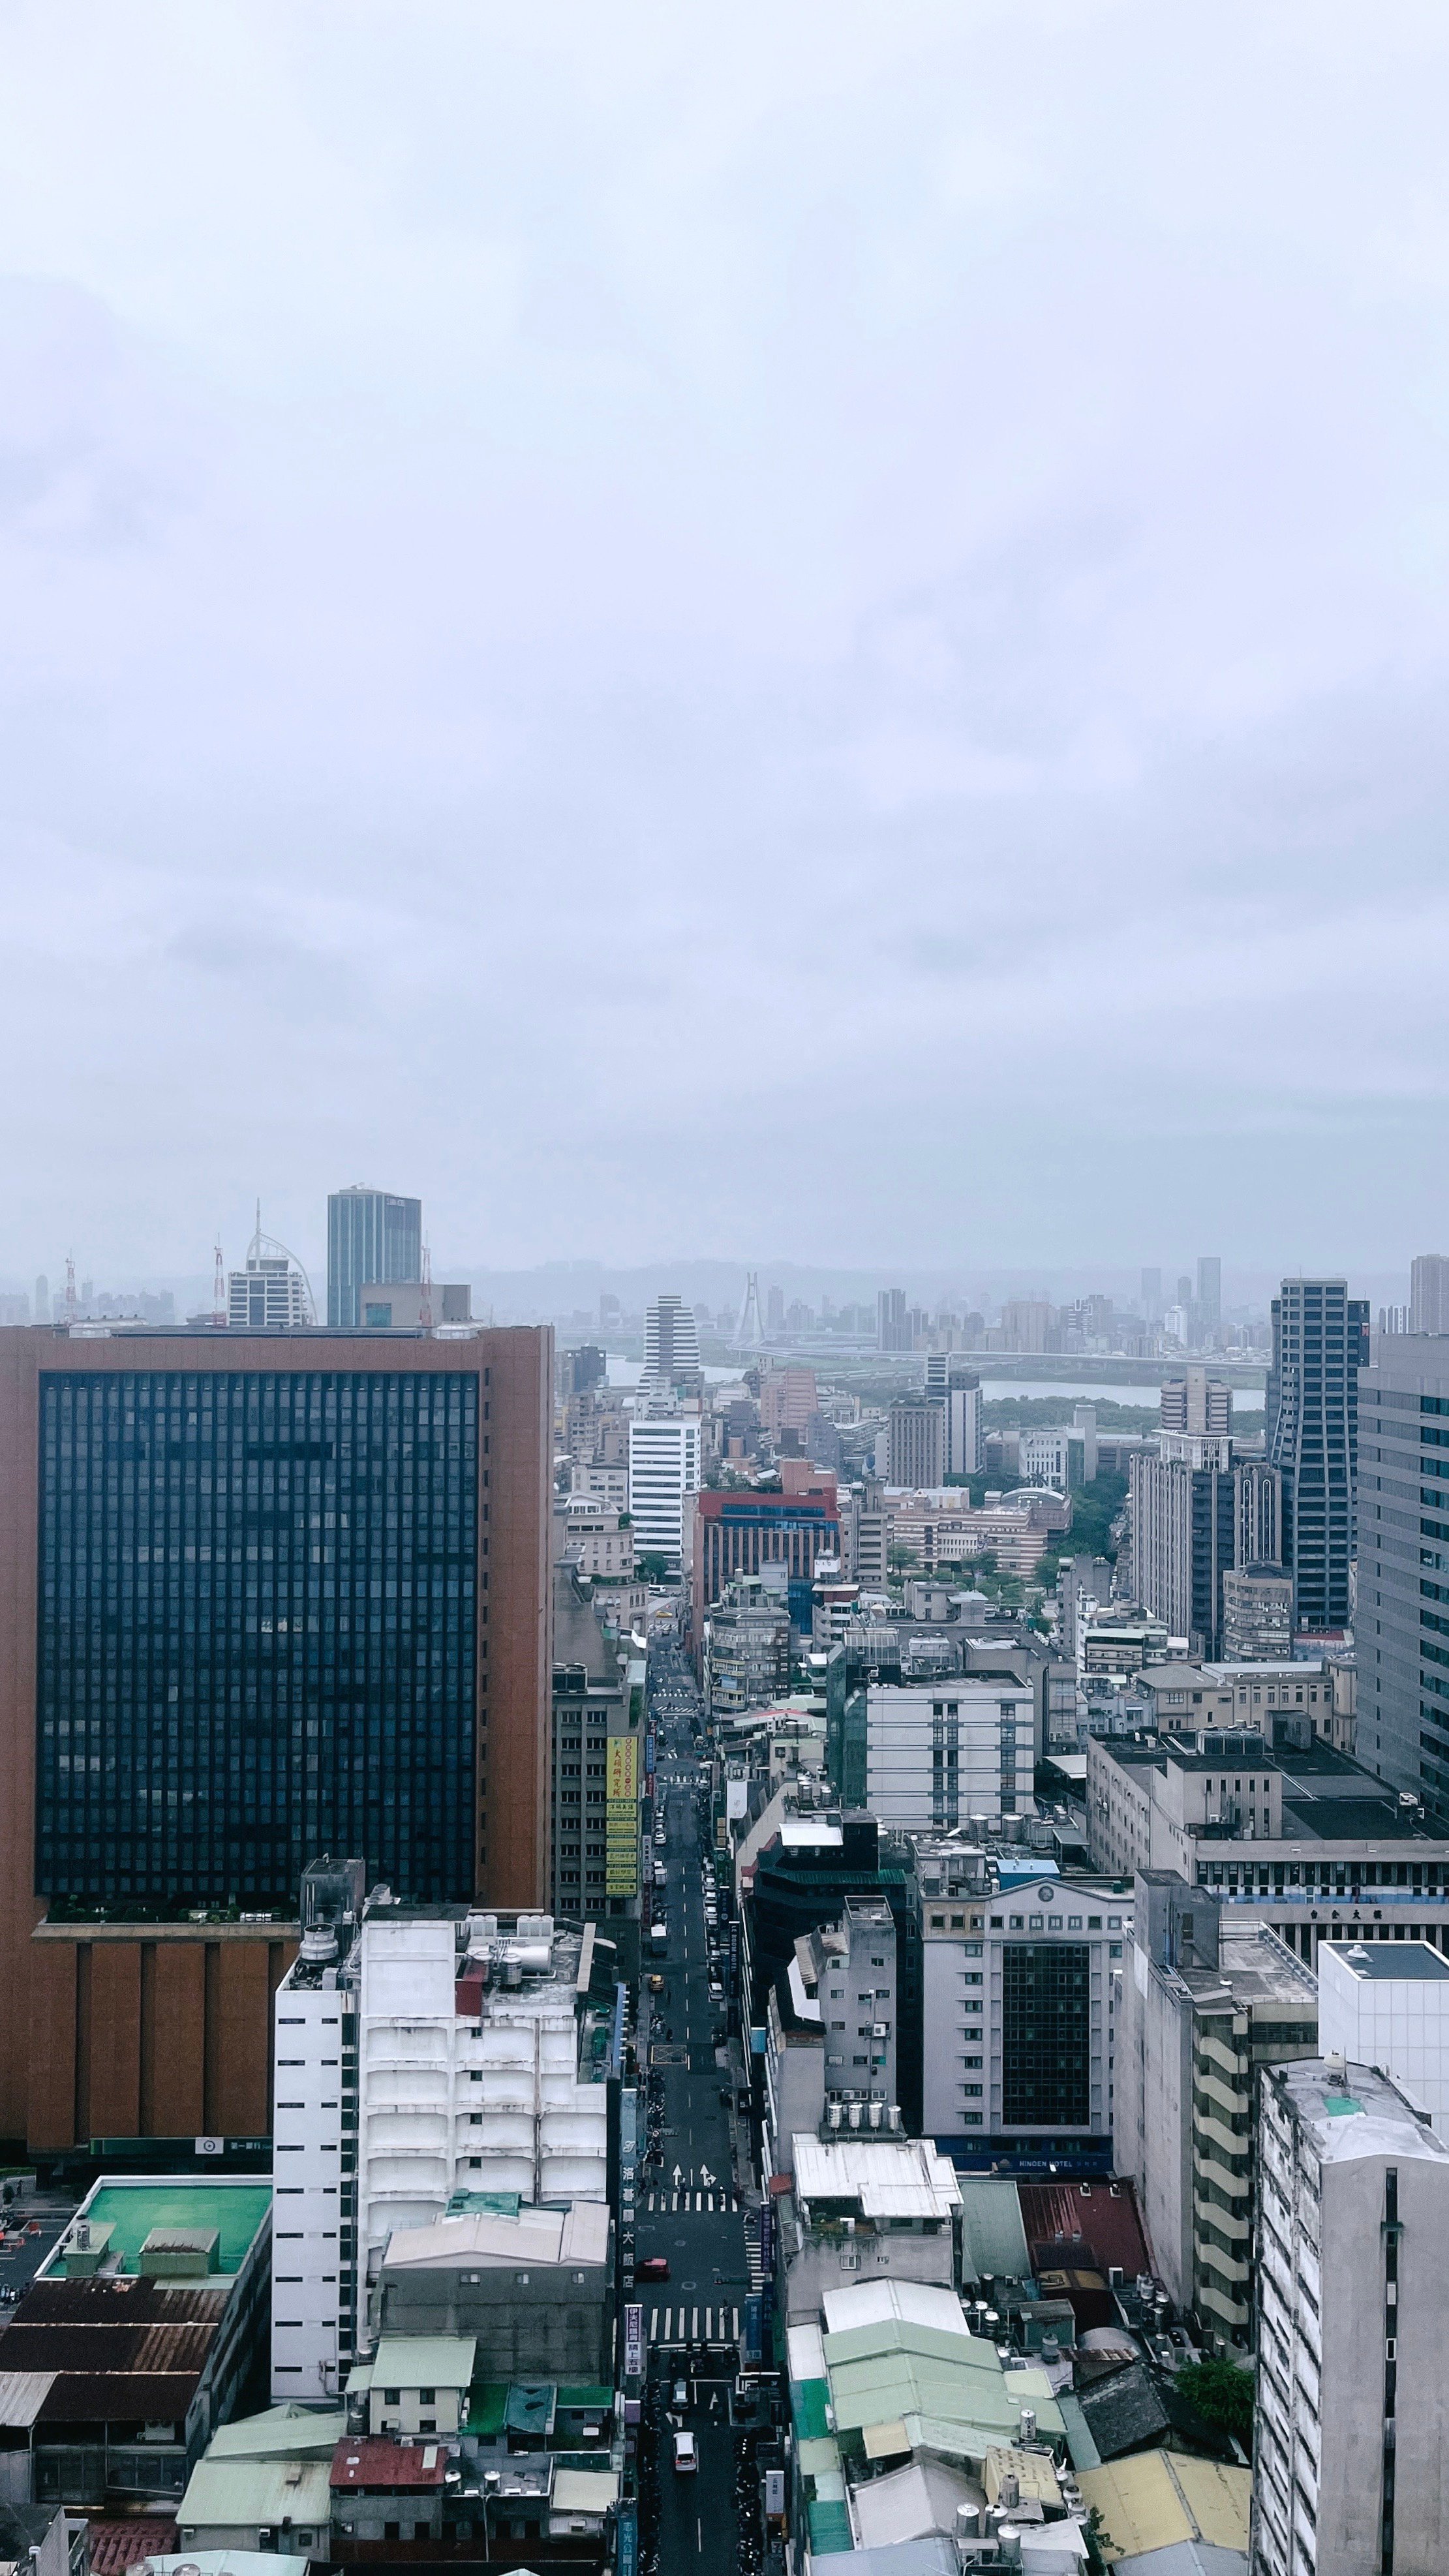 cityscape with short and tall buildings under a cloudy sky
